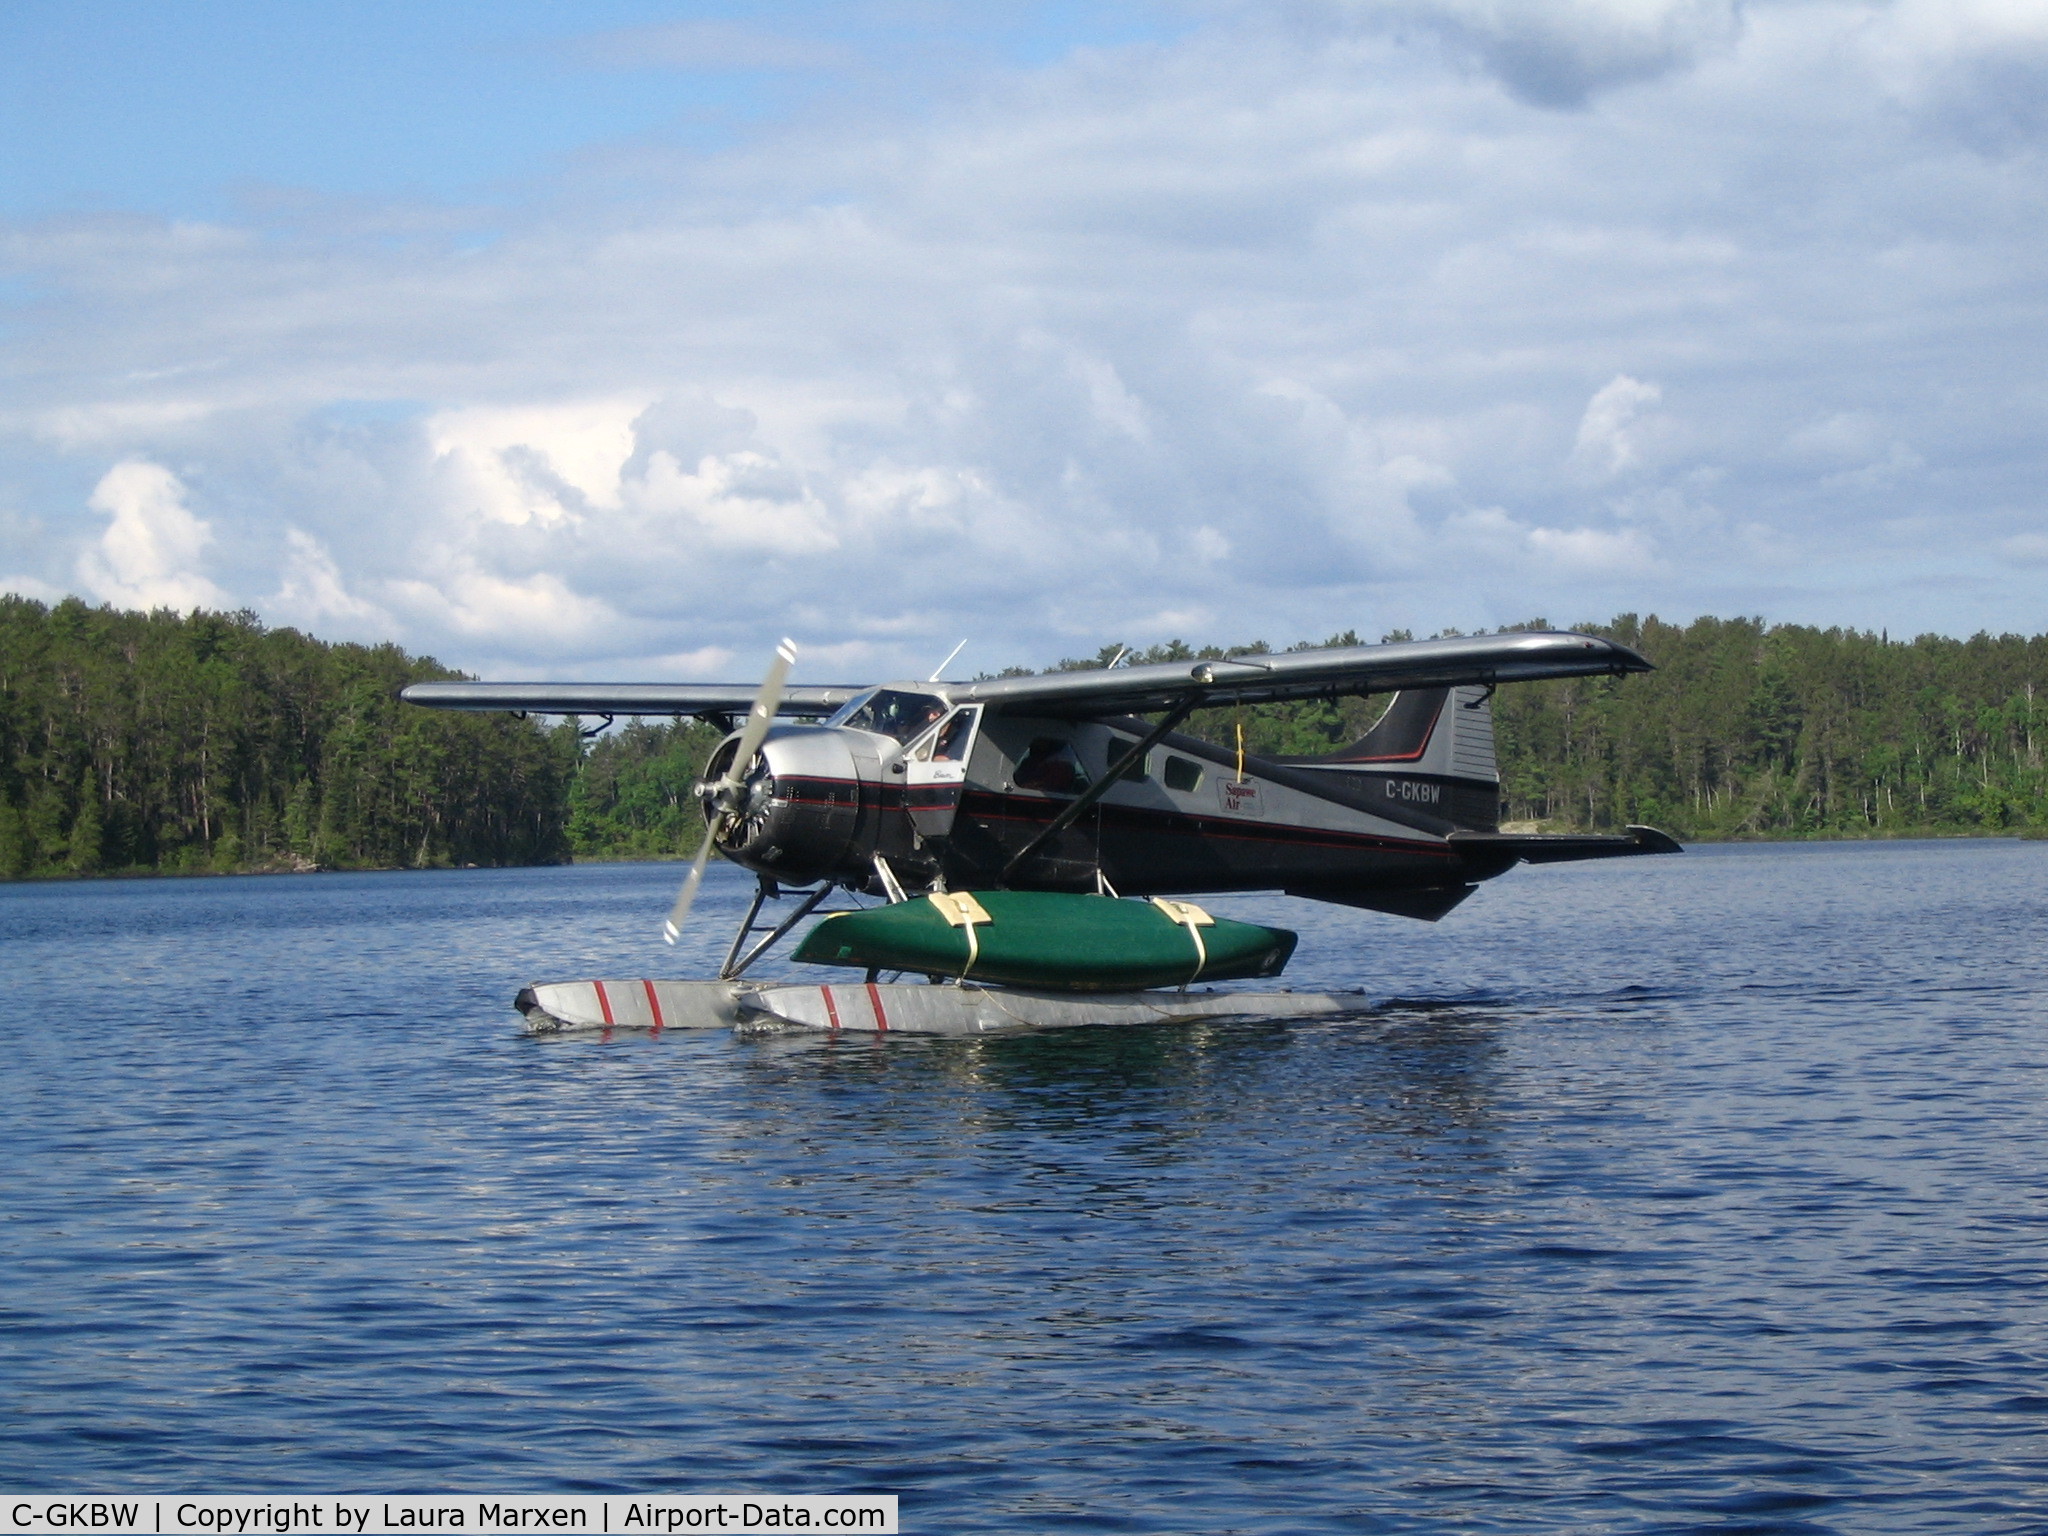 C-GKBW, 1952 De Havilland Canada DHC-2 Beaver Mk.1 C/N 310, deHavilland DHC-2 Beaver - s/n 310.  Owned and operated by Kashabowi Outposts in Atikokan, Ontario